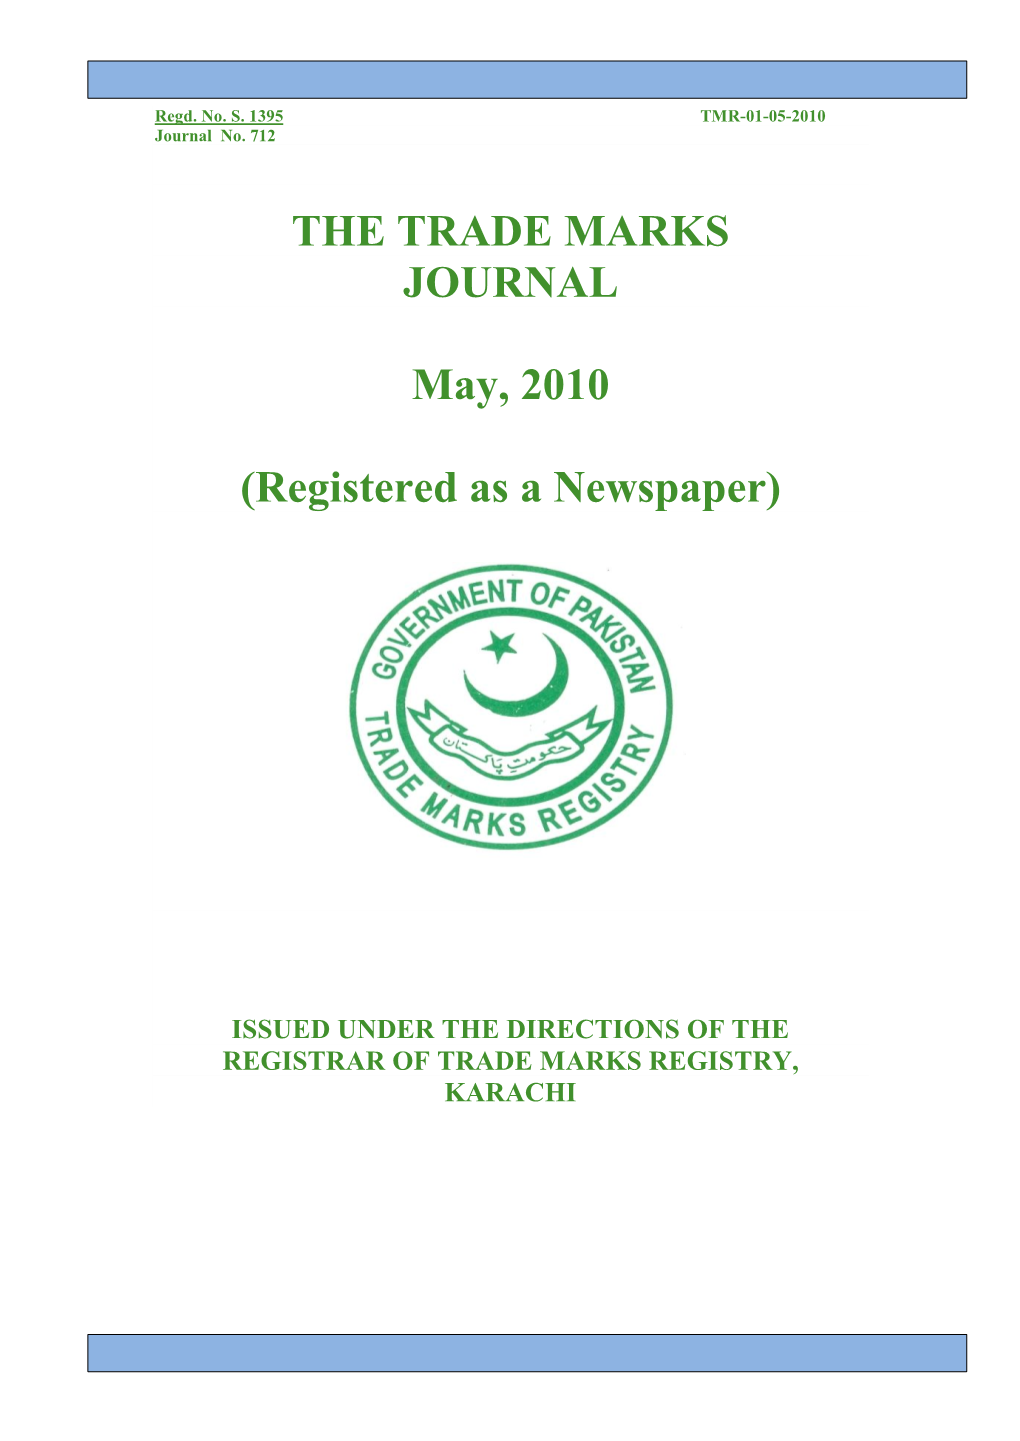 THE TRADE MARKS JOURNAL May, 2010